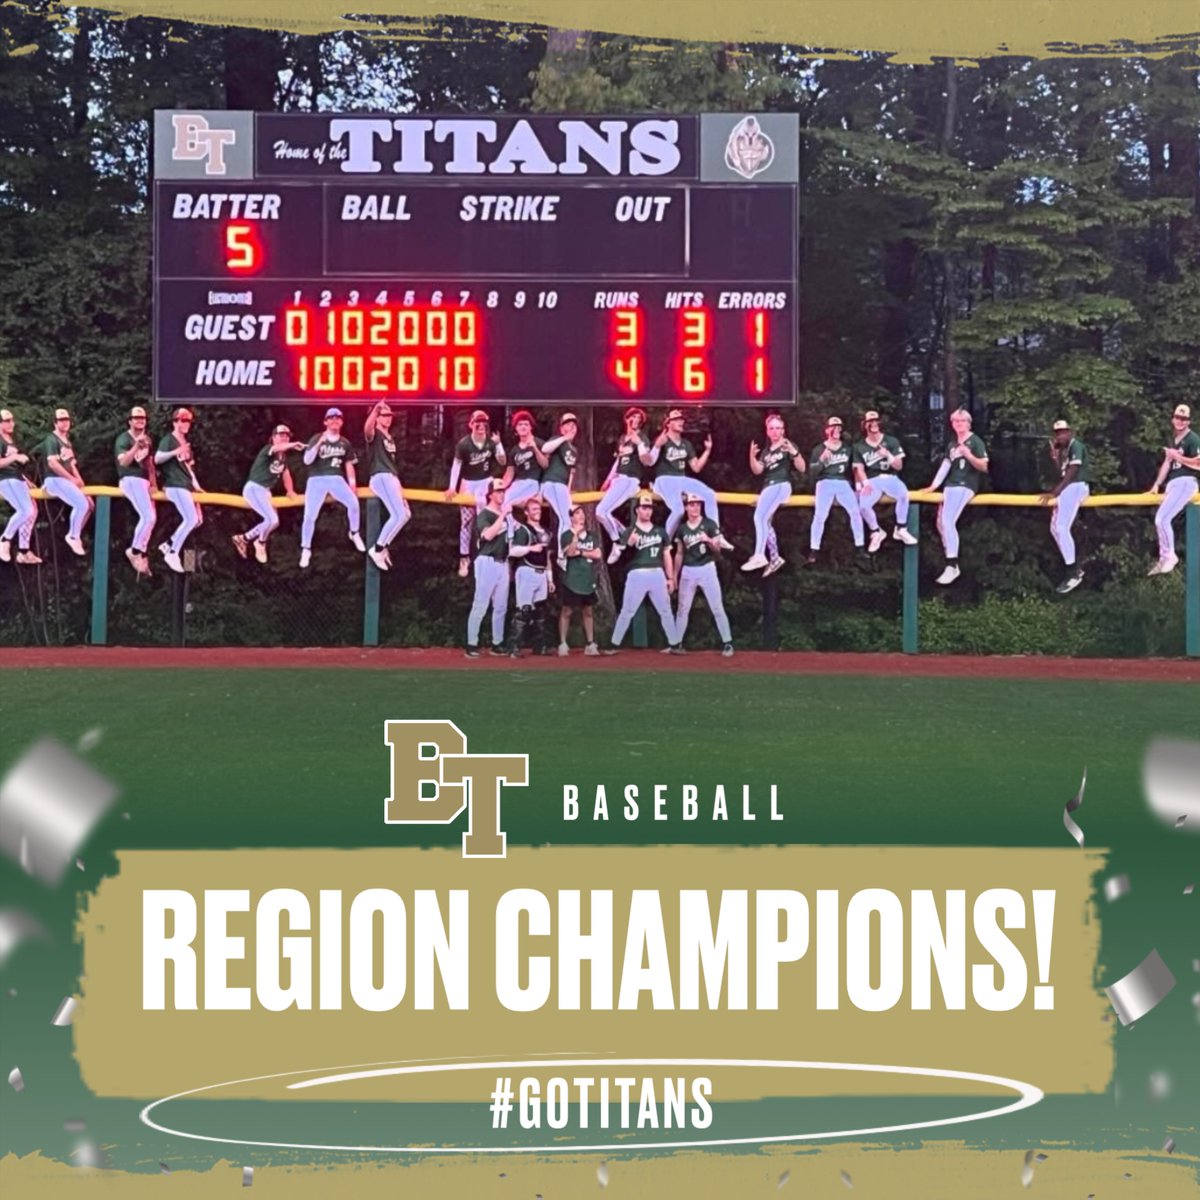 Baseball defeats Pope 4-3 to bring home another Region Championship! Well done! #GoTitans